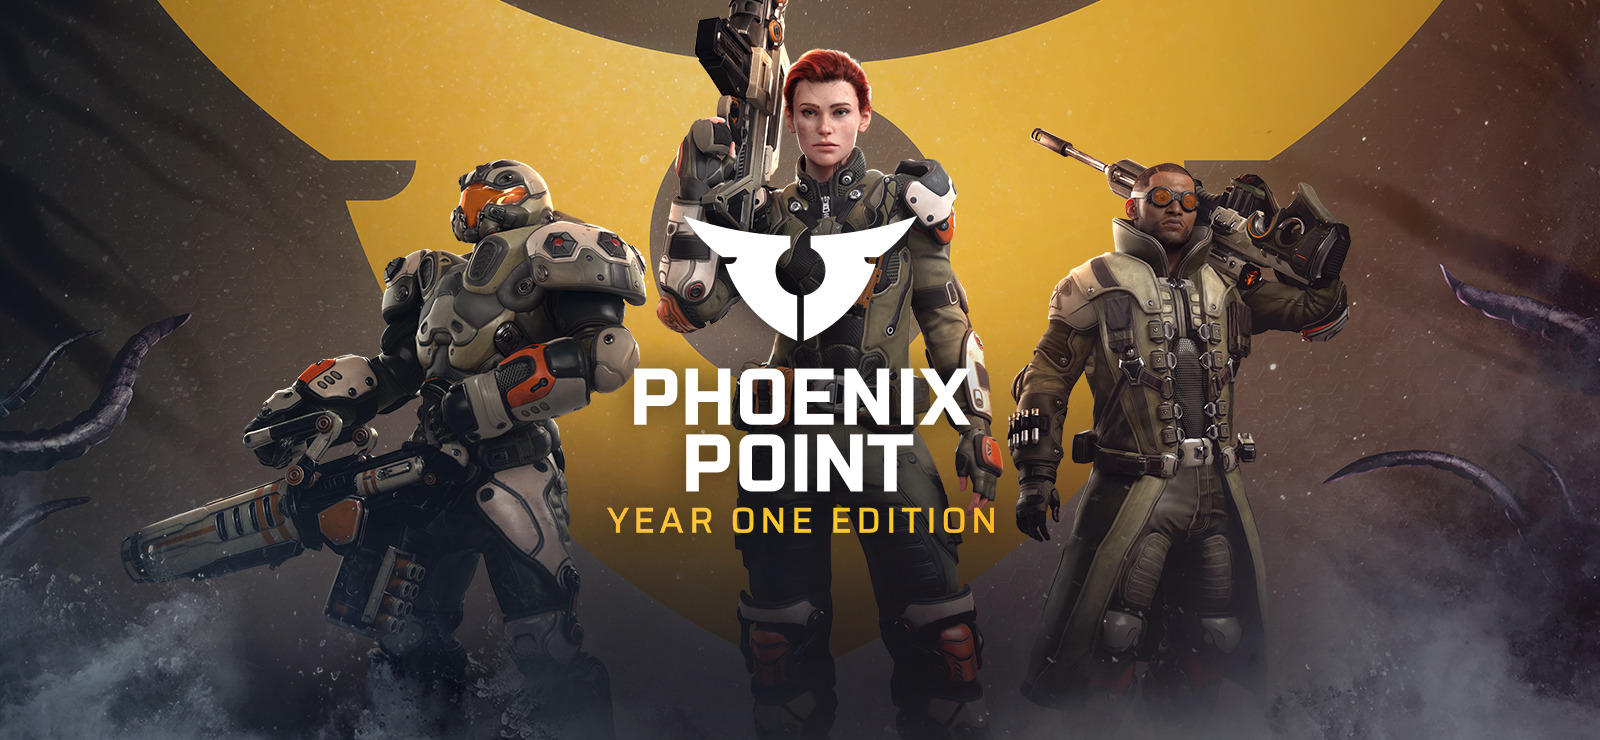 phoenix point year one edition download free